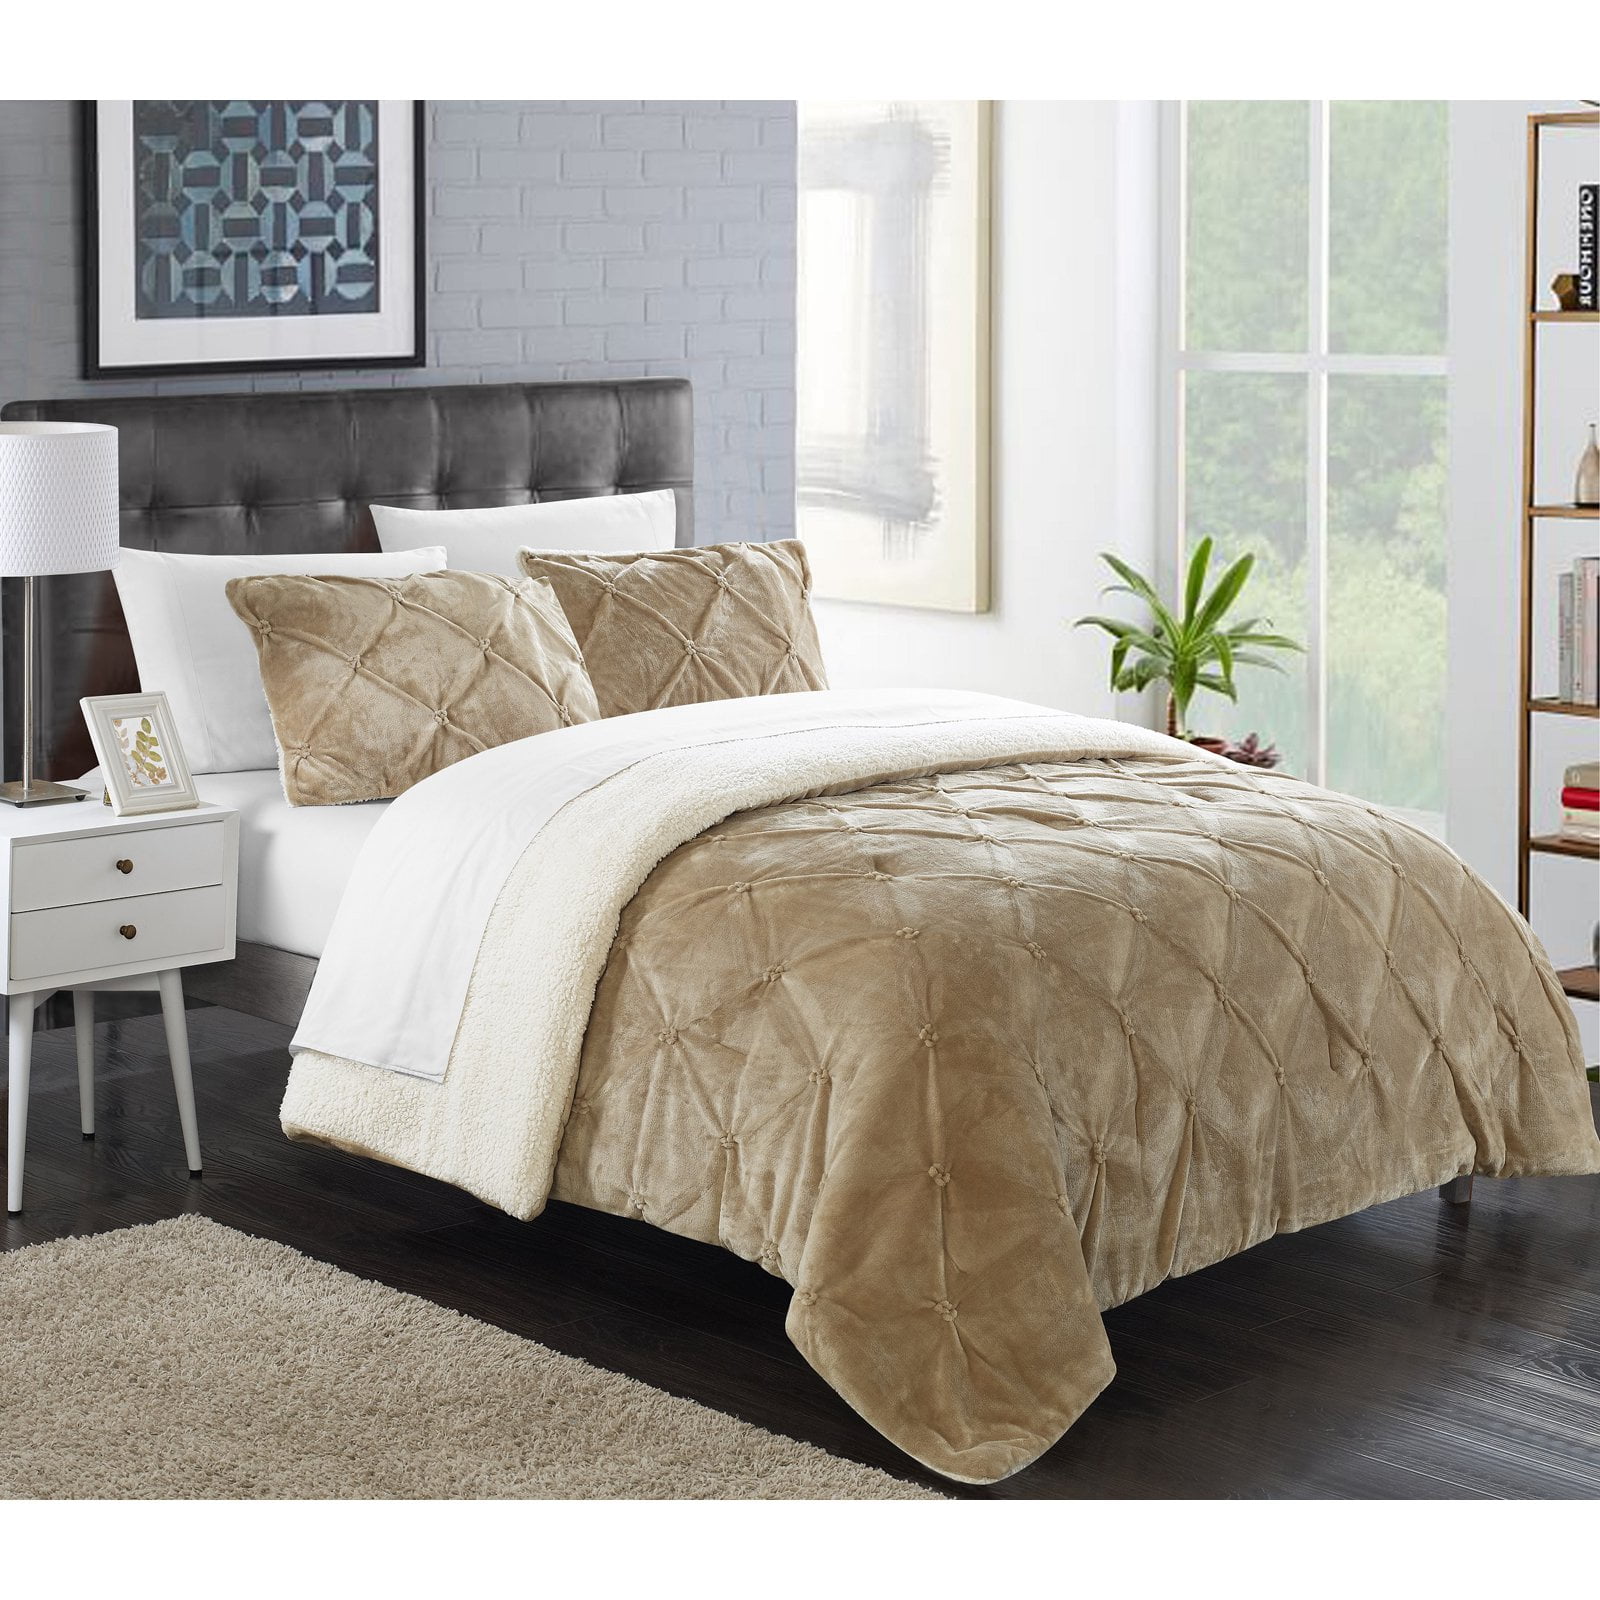 Chic Home Chiara 7-Piece Sherpa Lined Bed in a Bag Comforter Set ...